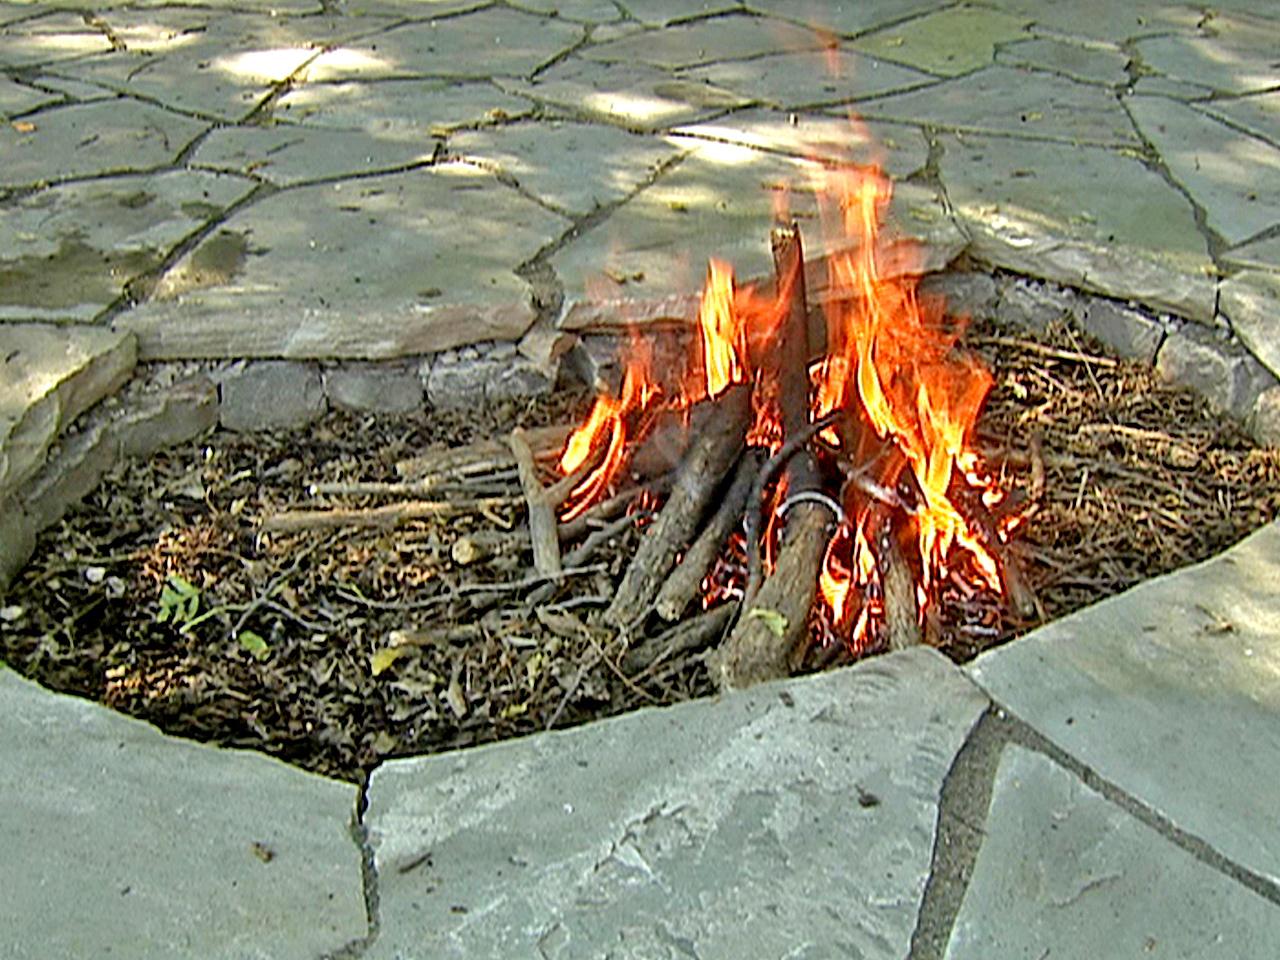 Outdoor Fire Pits And Pit Safety, Are Gas Fire Pits Dangerous